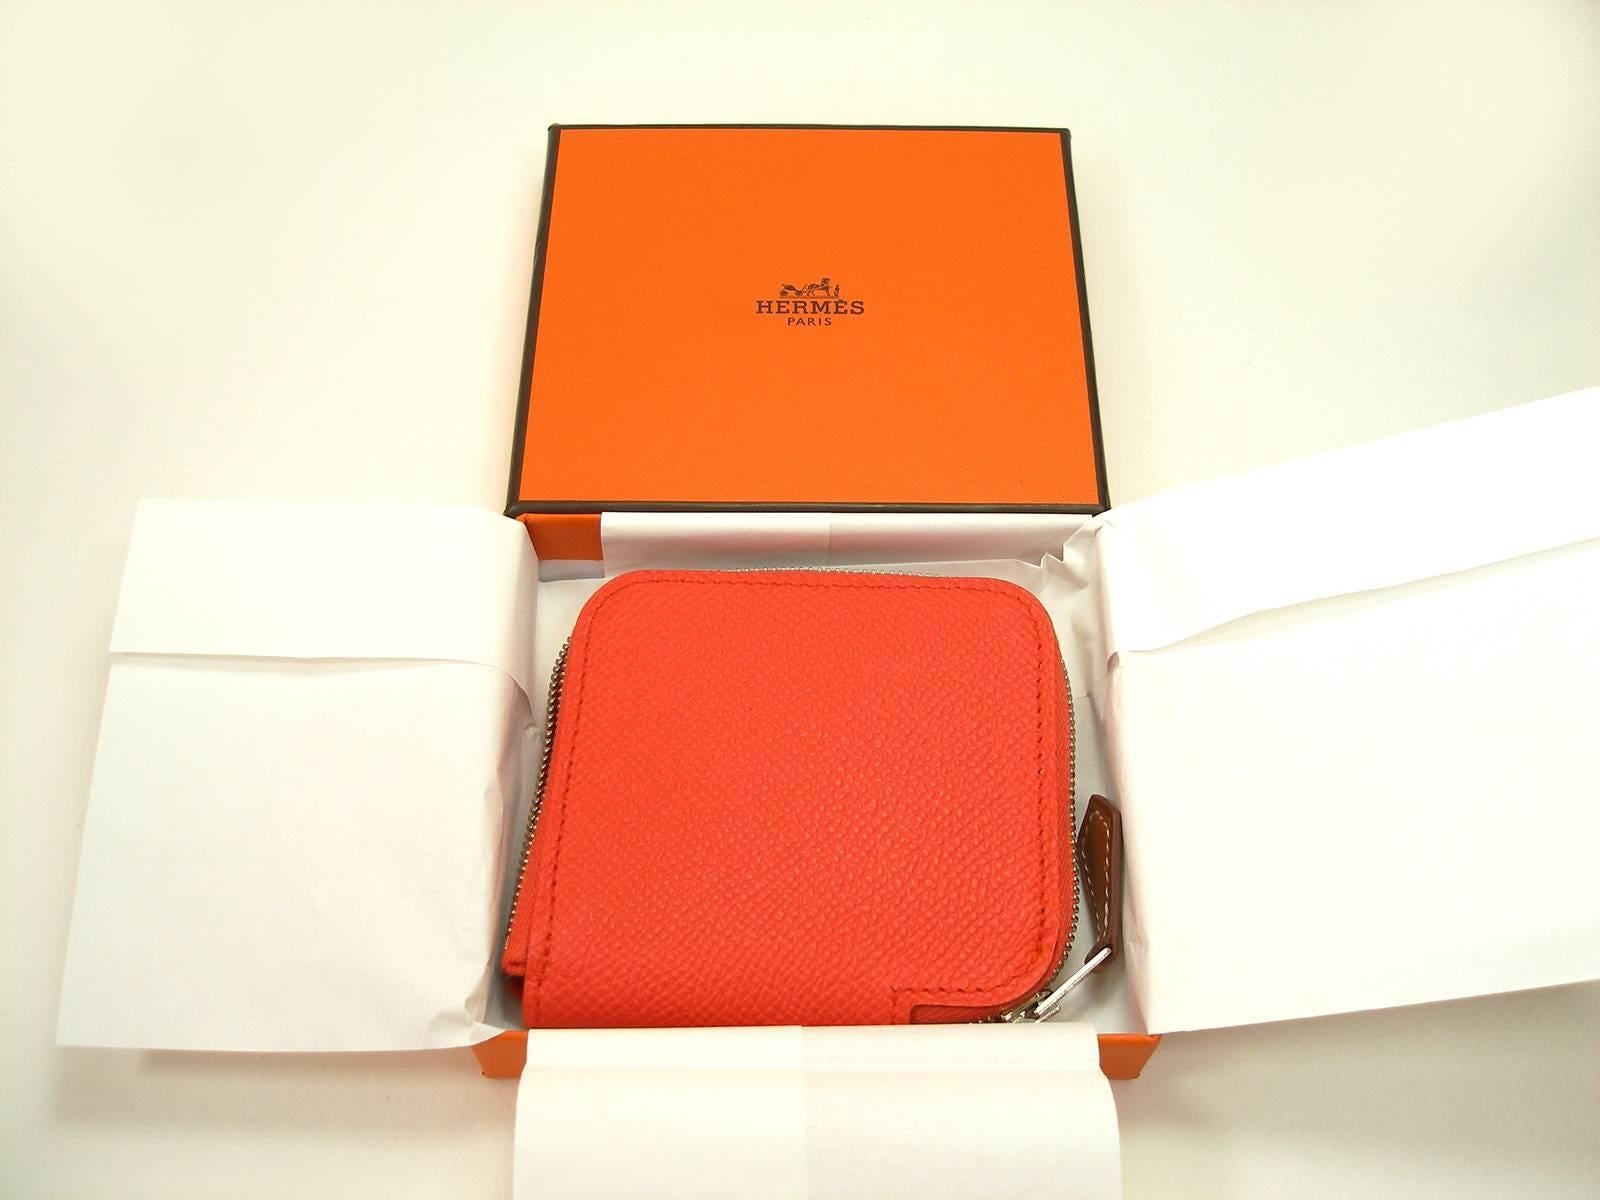 Sold Out in Hermès Shop !
Rare Small Change Coin Purse Hermès
Color : orange poppy
Epsom leather
Étriers 654 printed silk lining 
Code date inside
Production : X 
Measurement : 8 X 8 cm
Printed Hermés Paris Made in France
Its comes with Hermès box